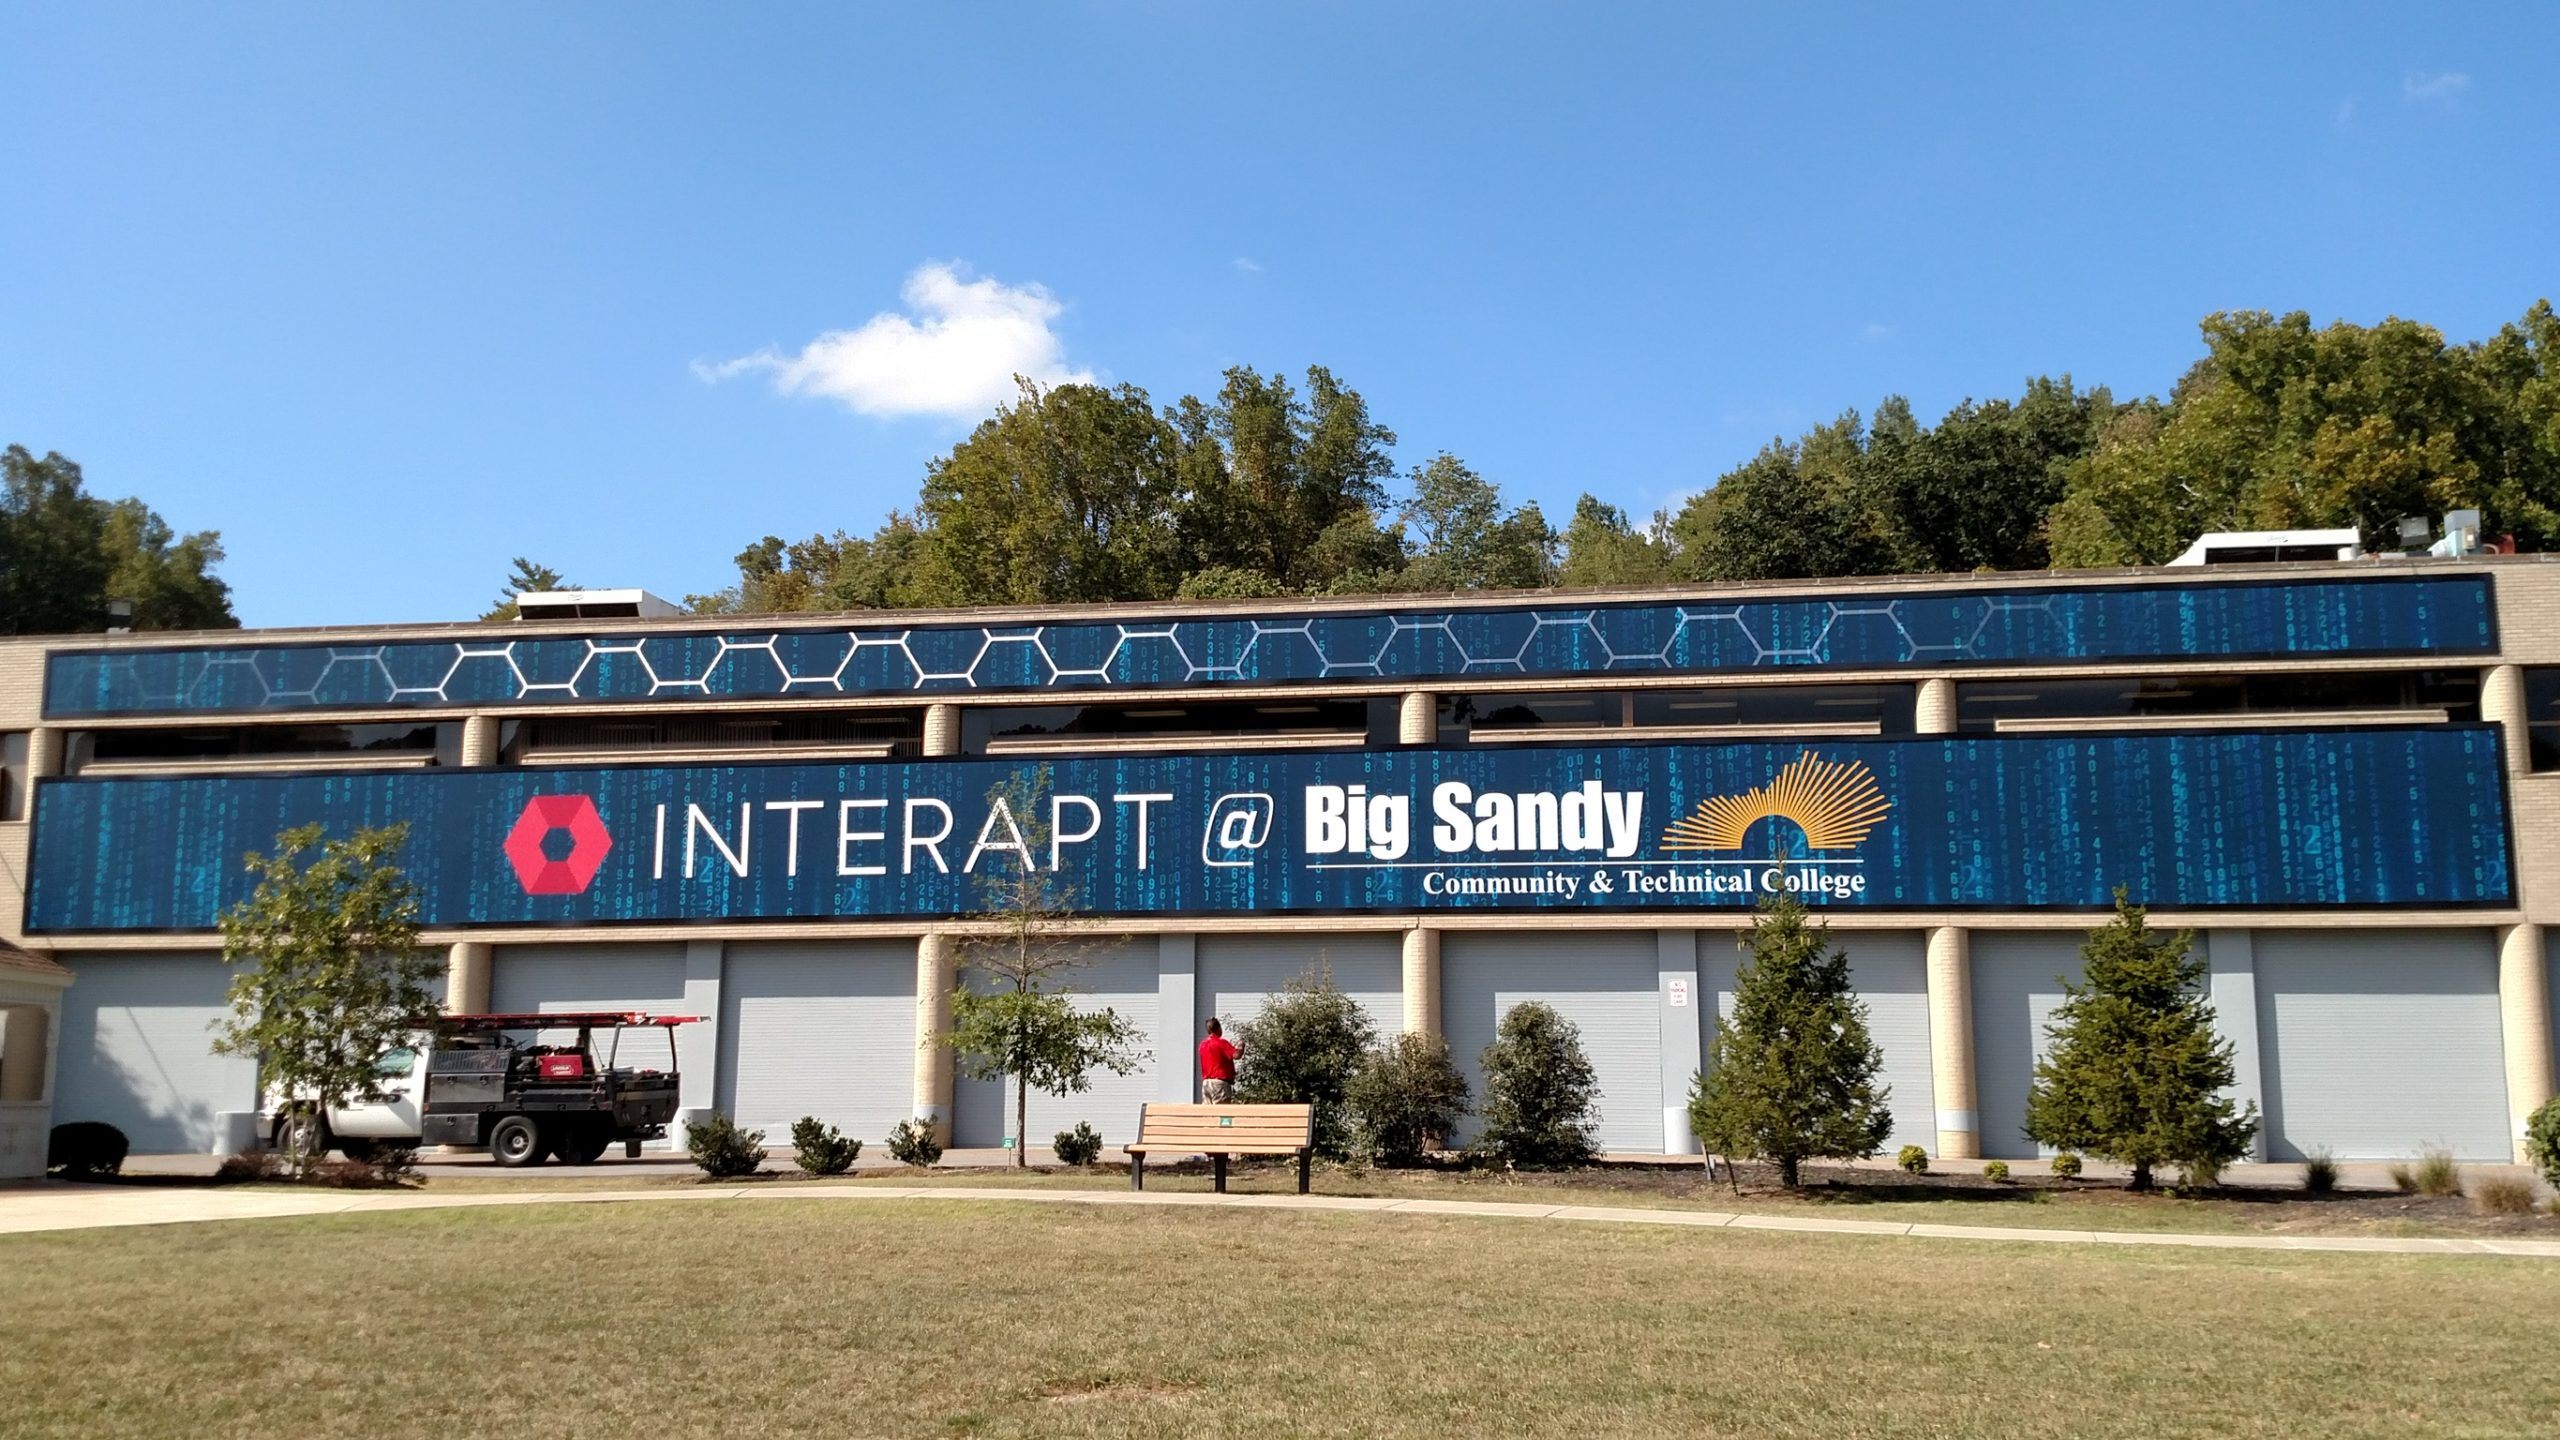 Interapt-at-Big-Sandy-Community-and-Technical-College-Lind-SignSpring-banner-frame-classic-8-4x200-7oz-vinyl-on-brick-scaled Wallscape of the Week: BannerFrame Classic Gets Technical